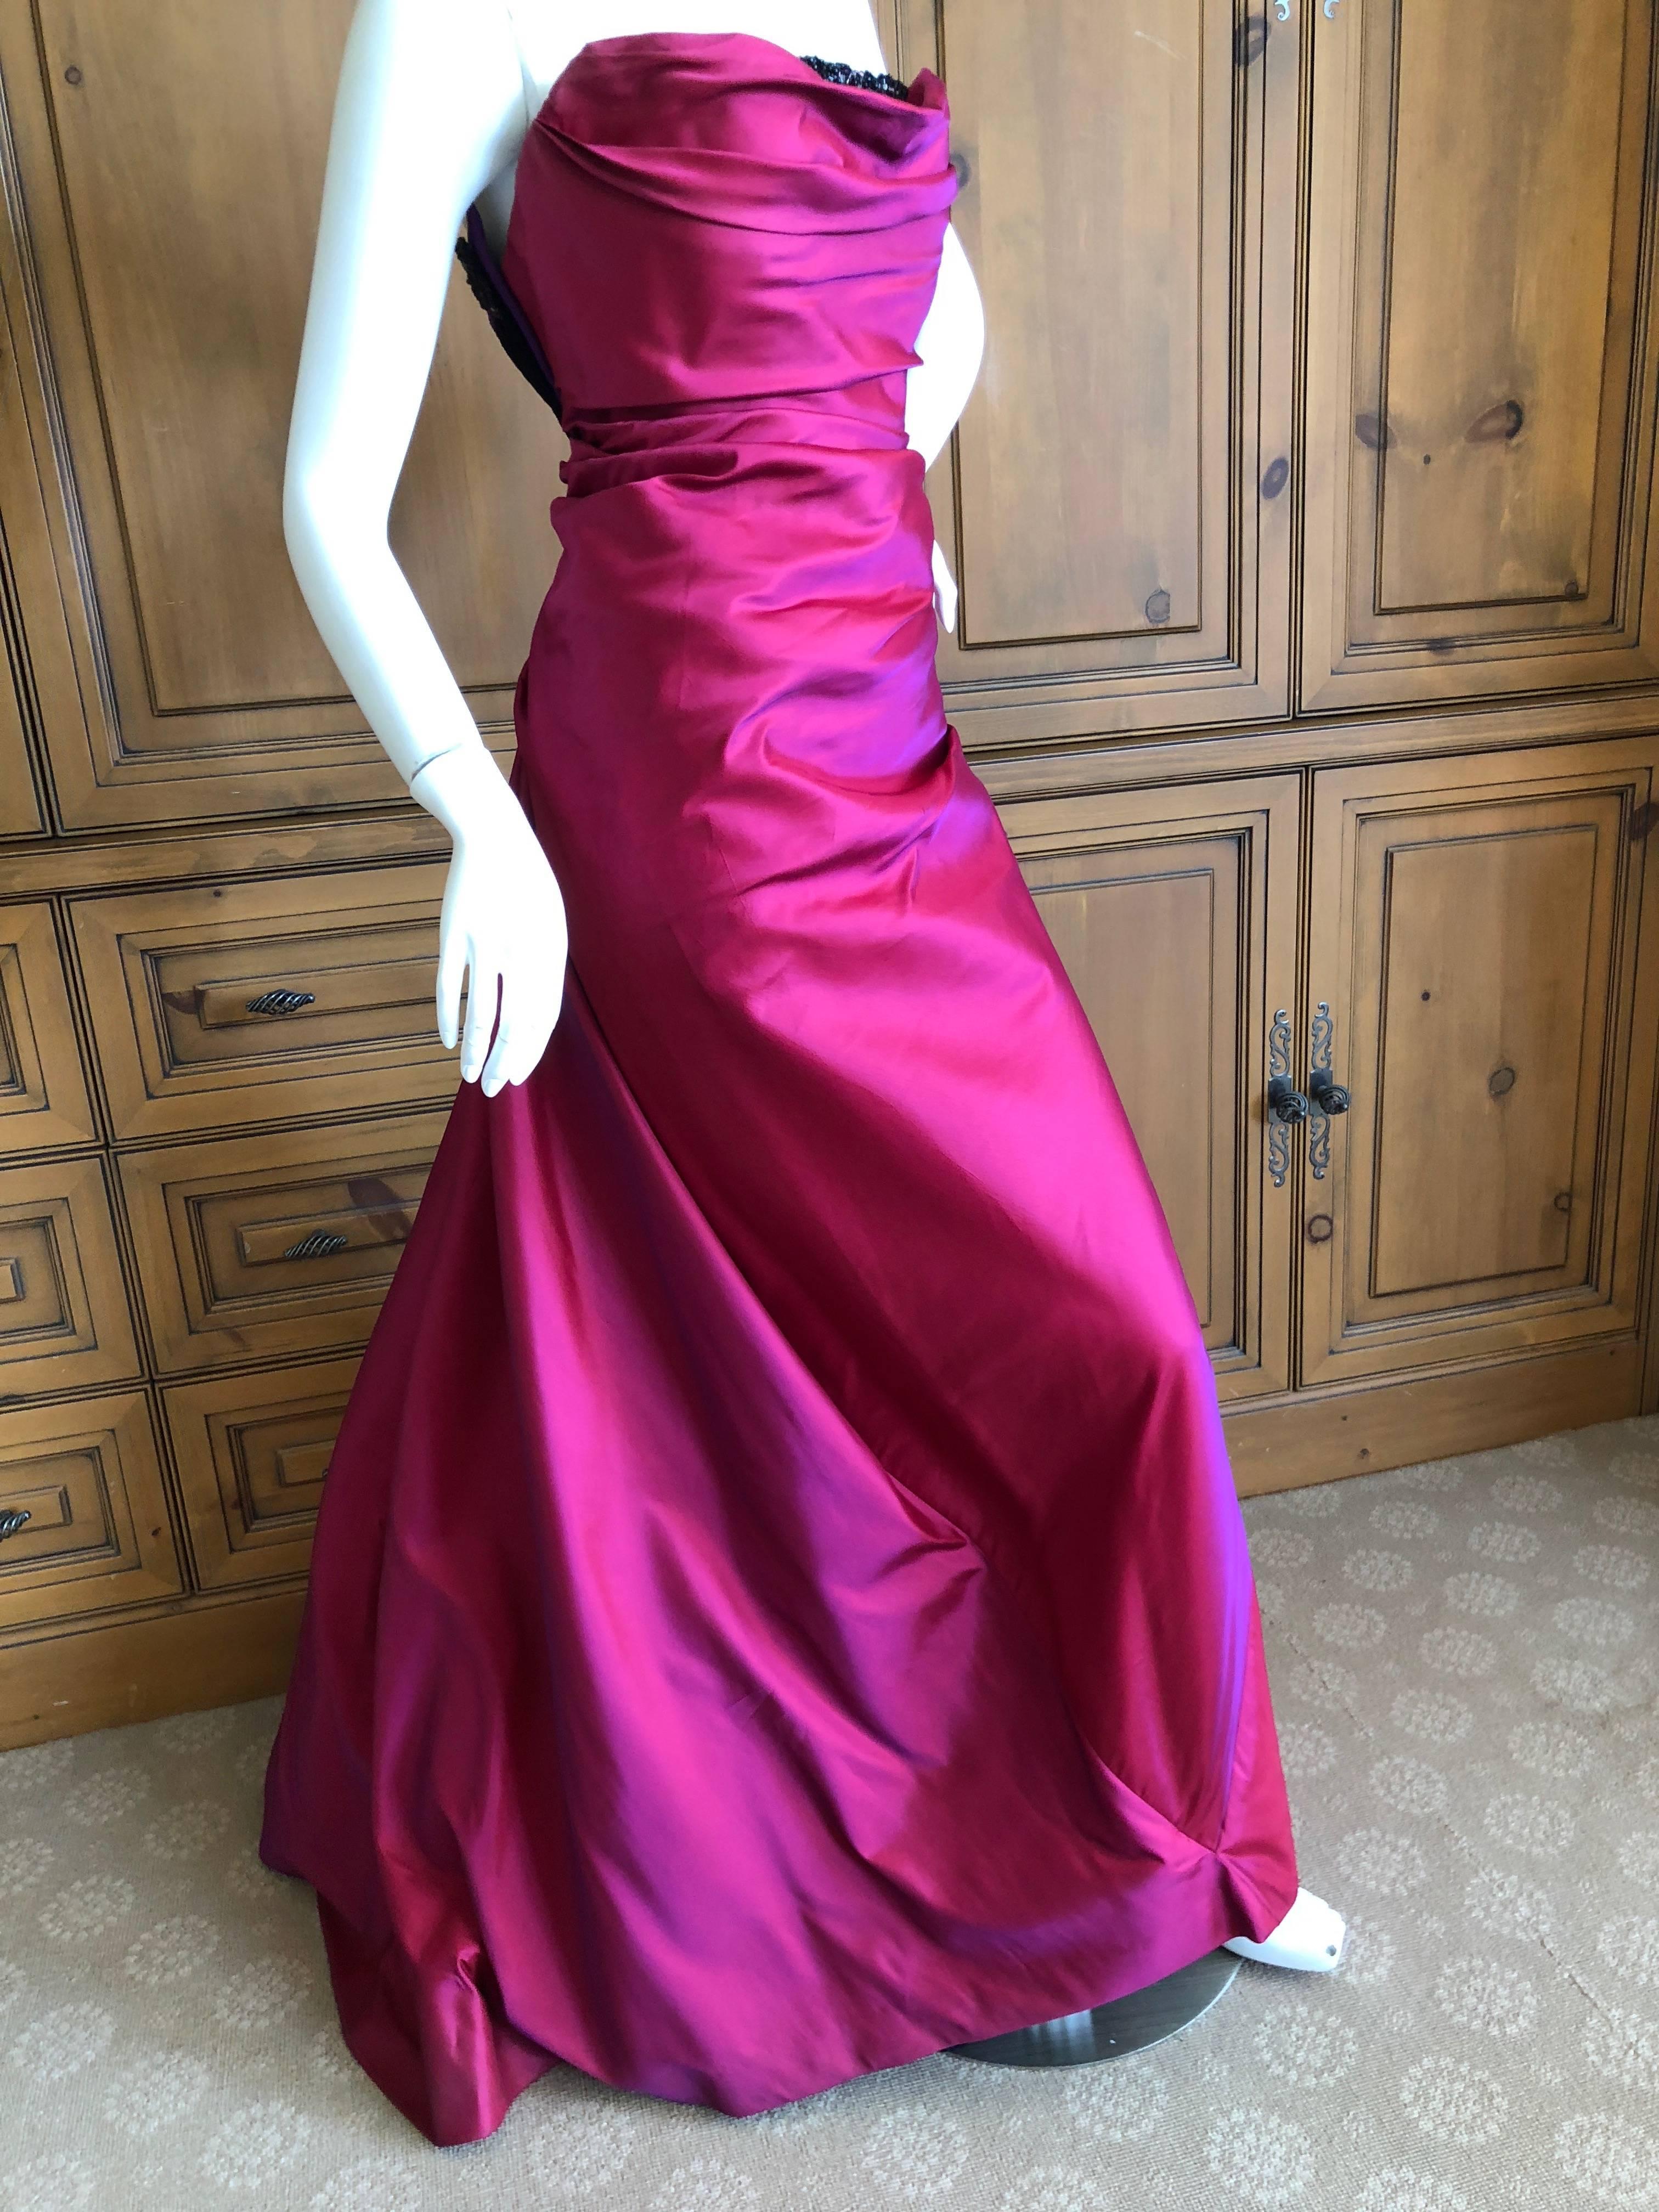 Women's Bob Mackie Glamorous Magenta Ballgown with Crystal Beaded Accents, 1980s 